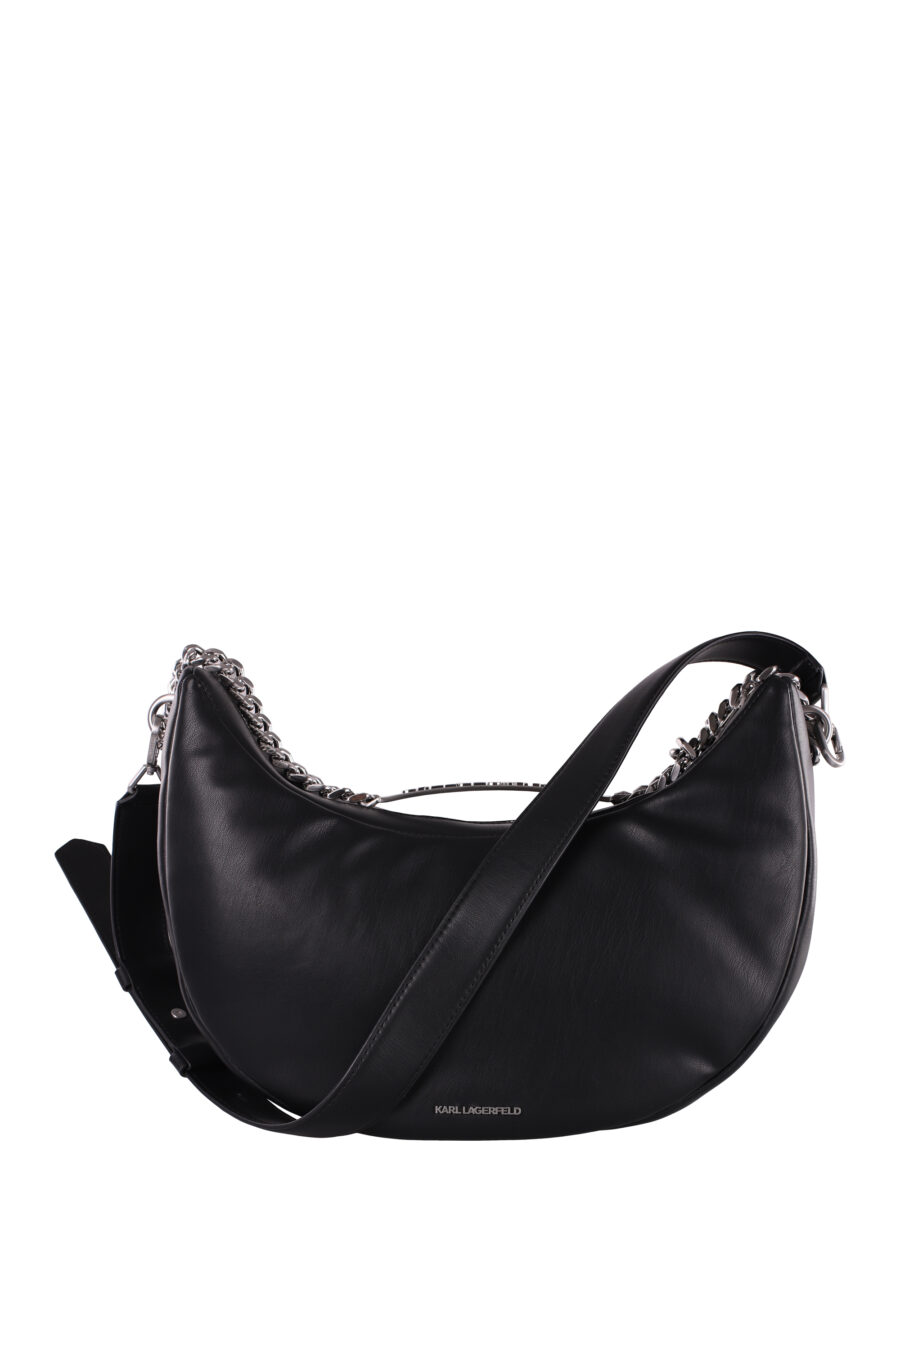 Black hobo bag with silver plated chain - IMG 6049